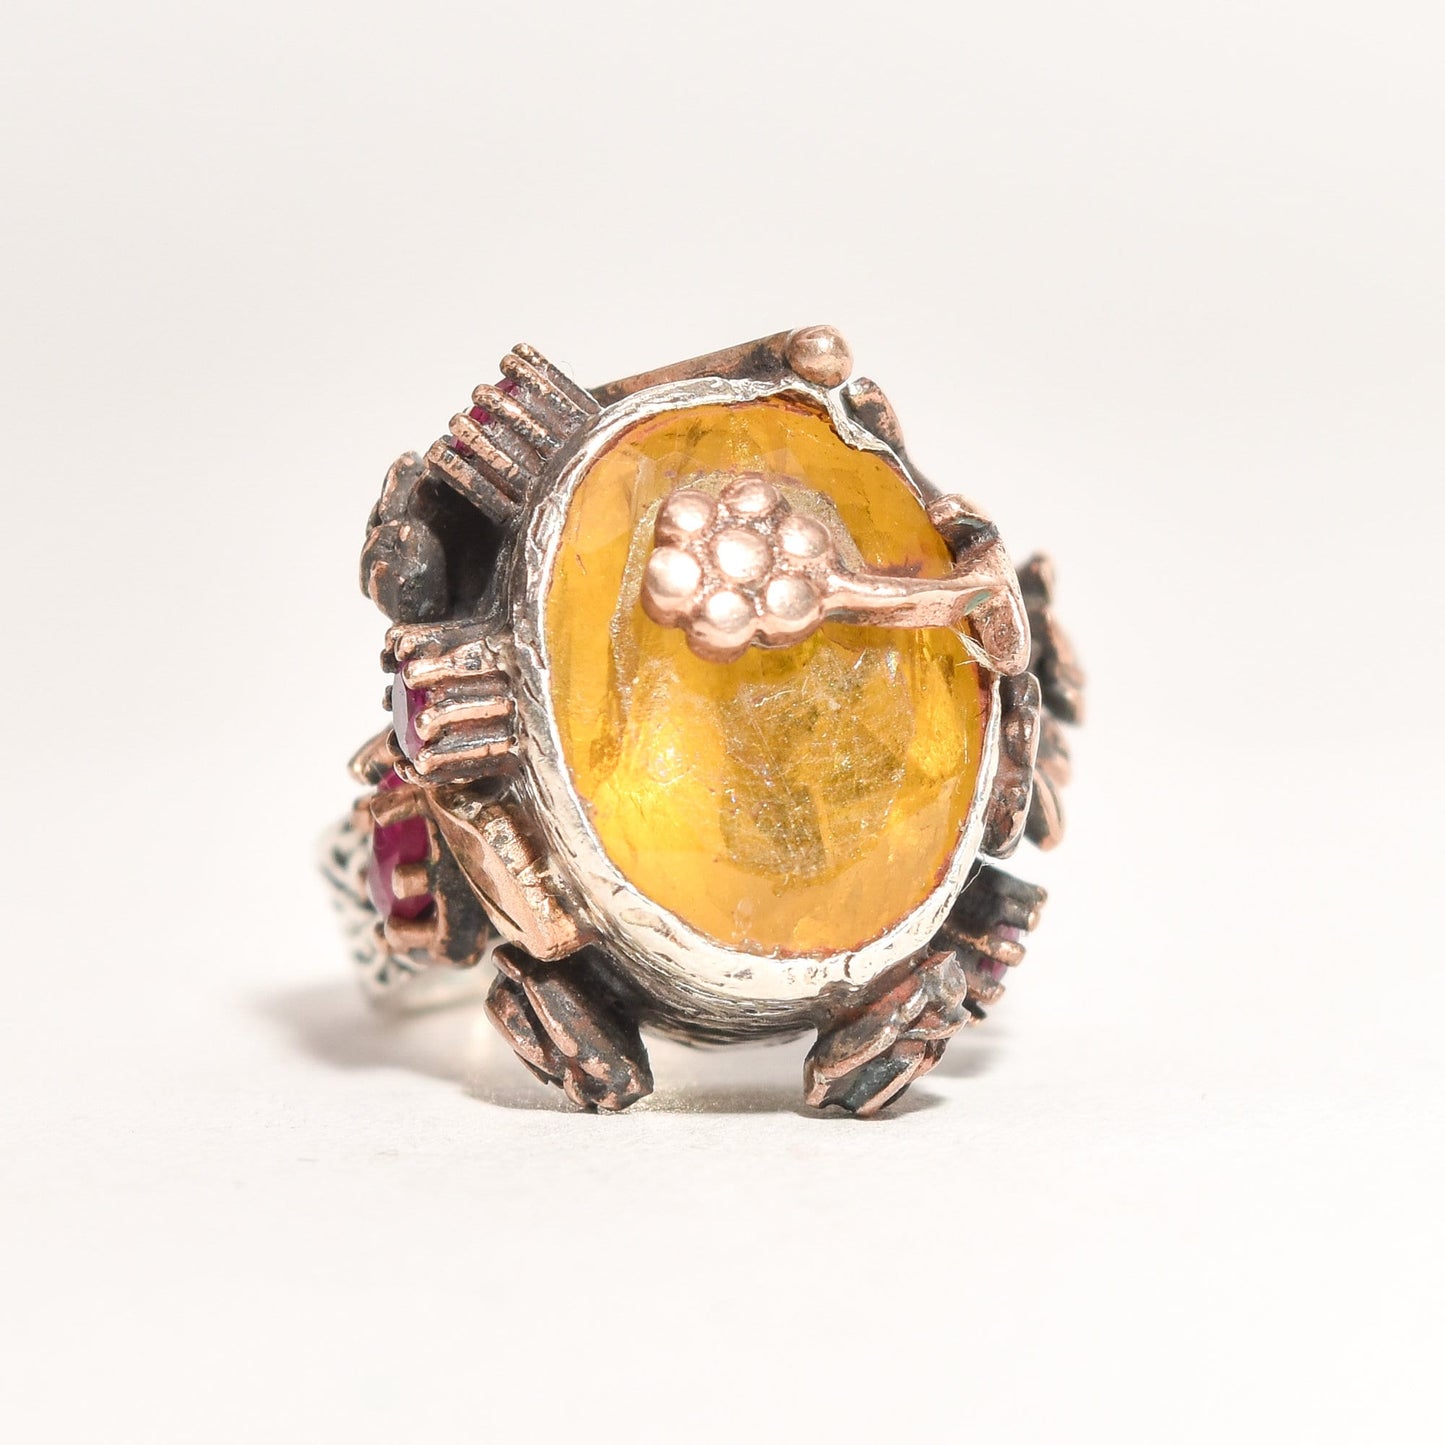 Brutalist sterling silver citrine and ruby flower ring, two-tone statement ring, size 6.25 US, displayed against a white background.